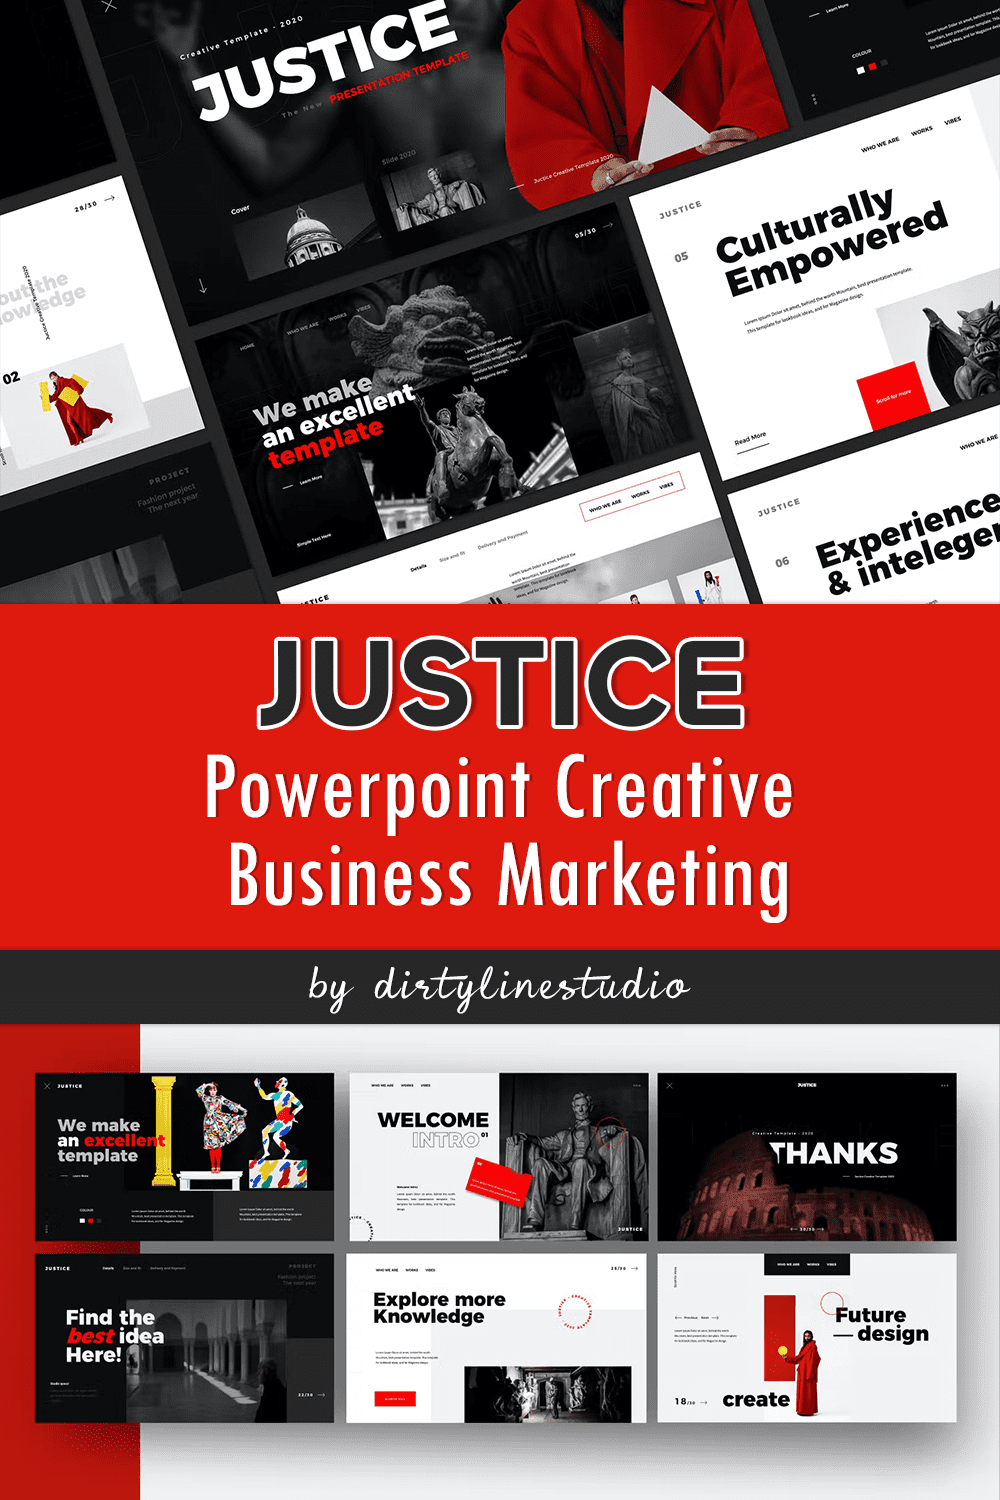 Justice powerpoint creative business marketing of pinterest.